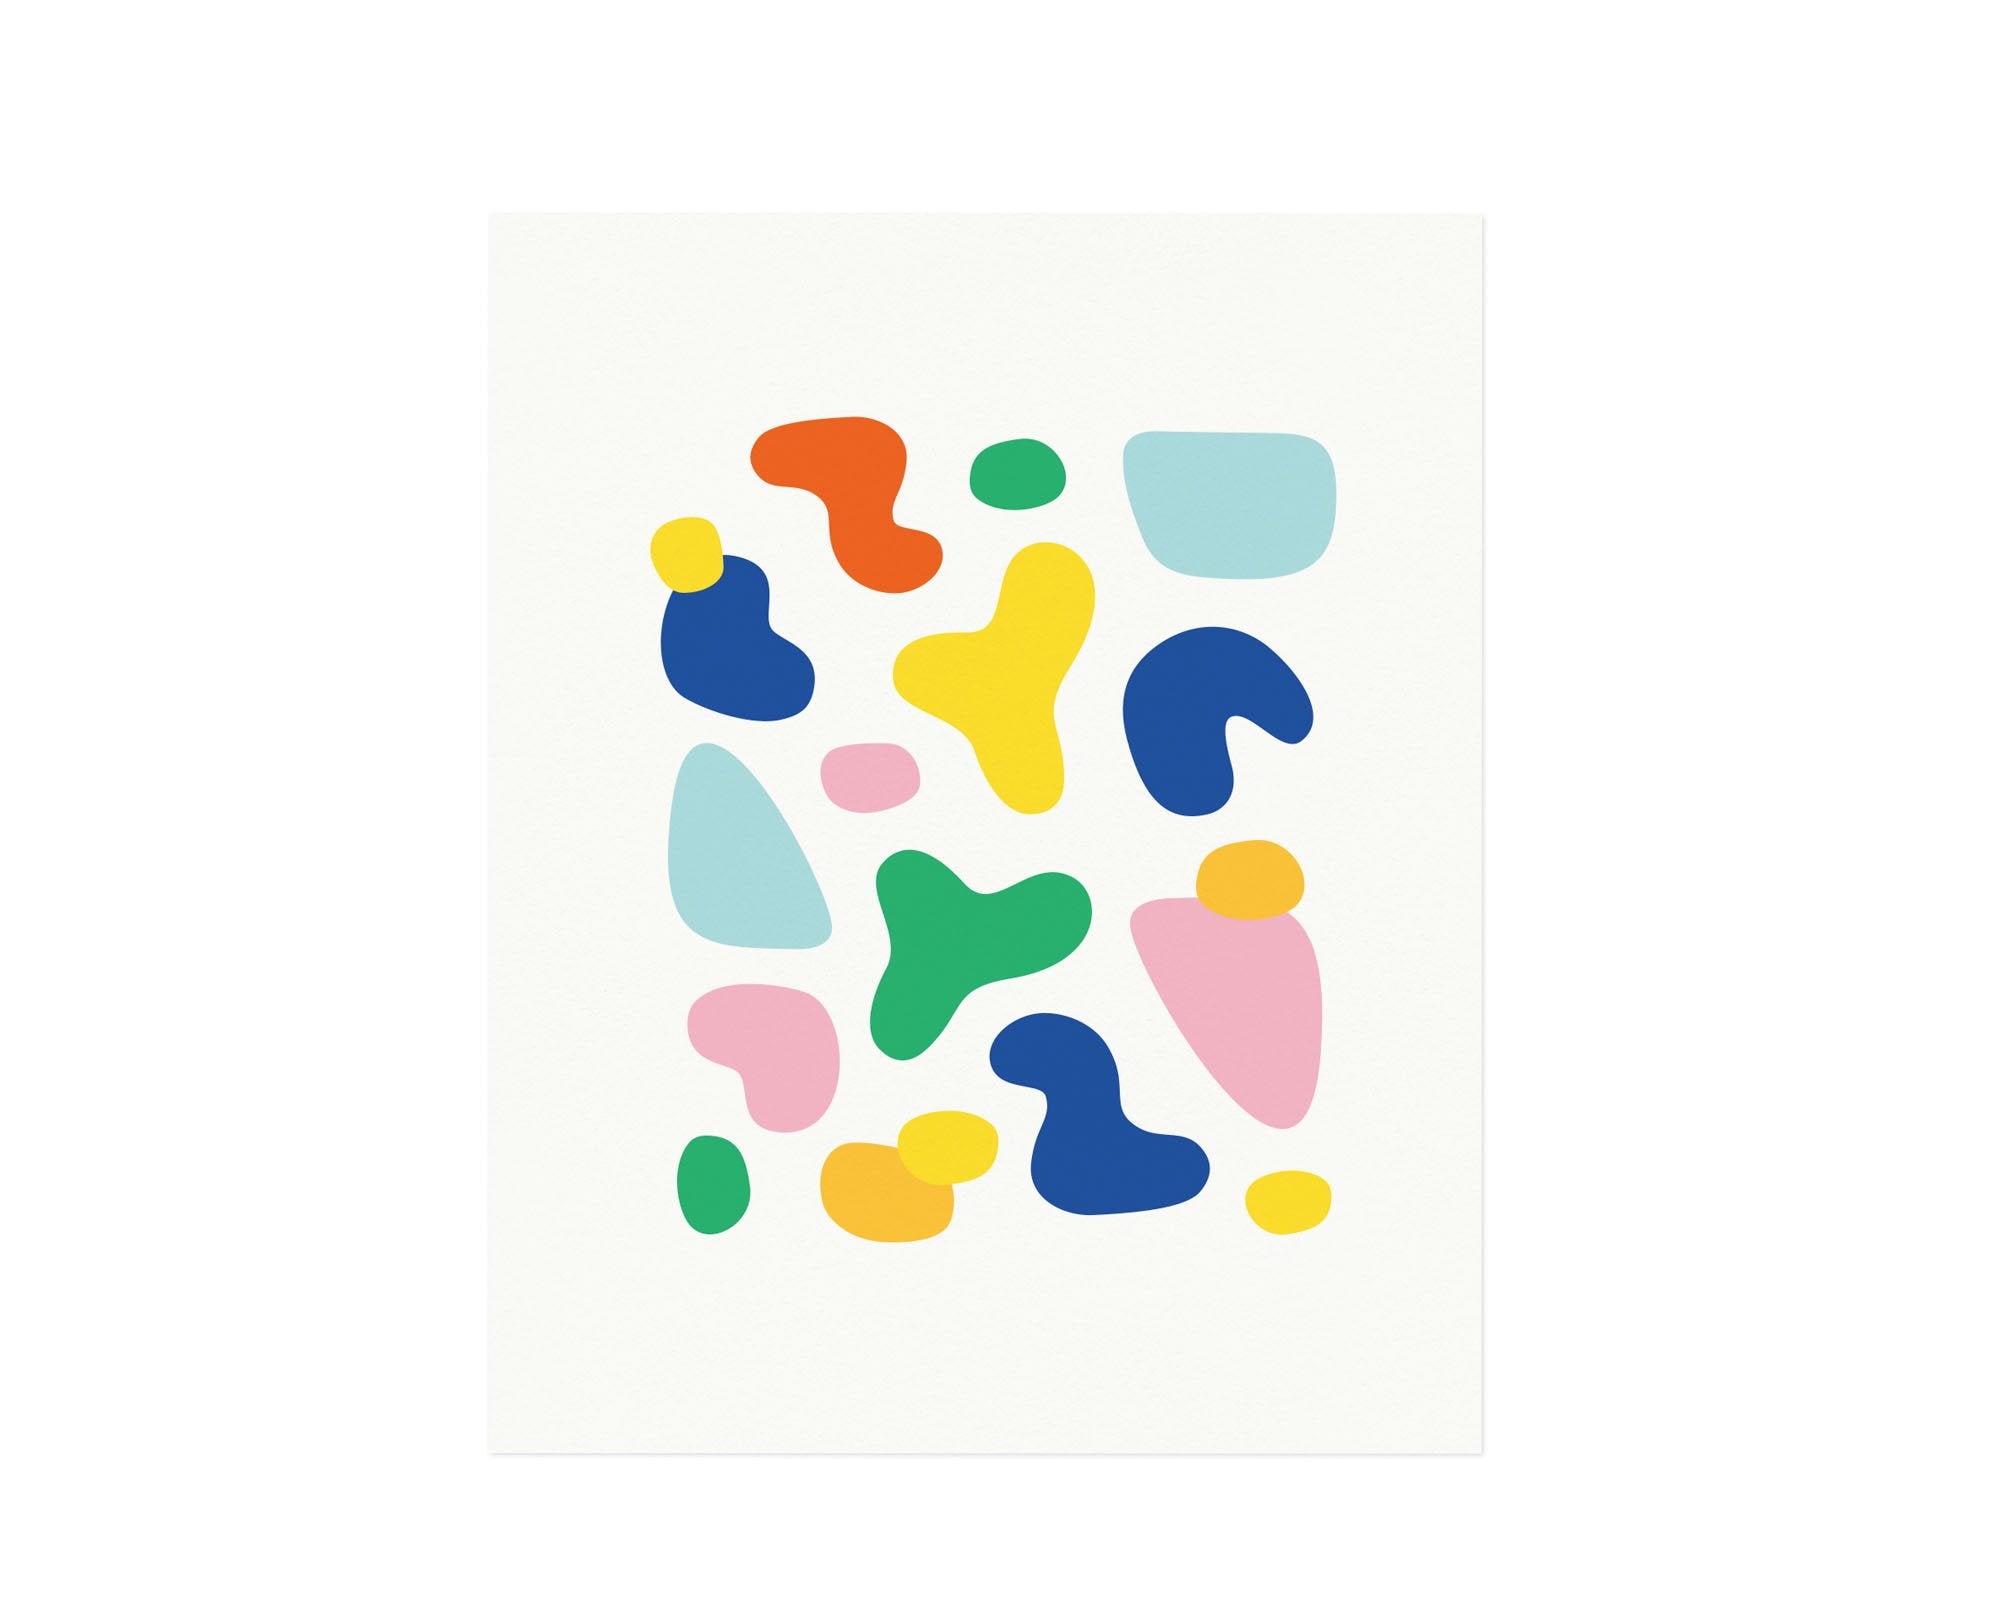 "Noki" abstract floating shapes archival giclée art print. Made in USA by My Darlin' @mydarlin_bk